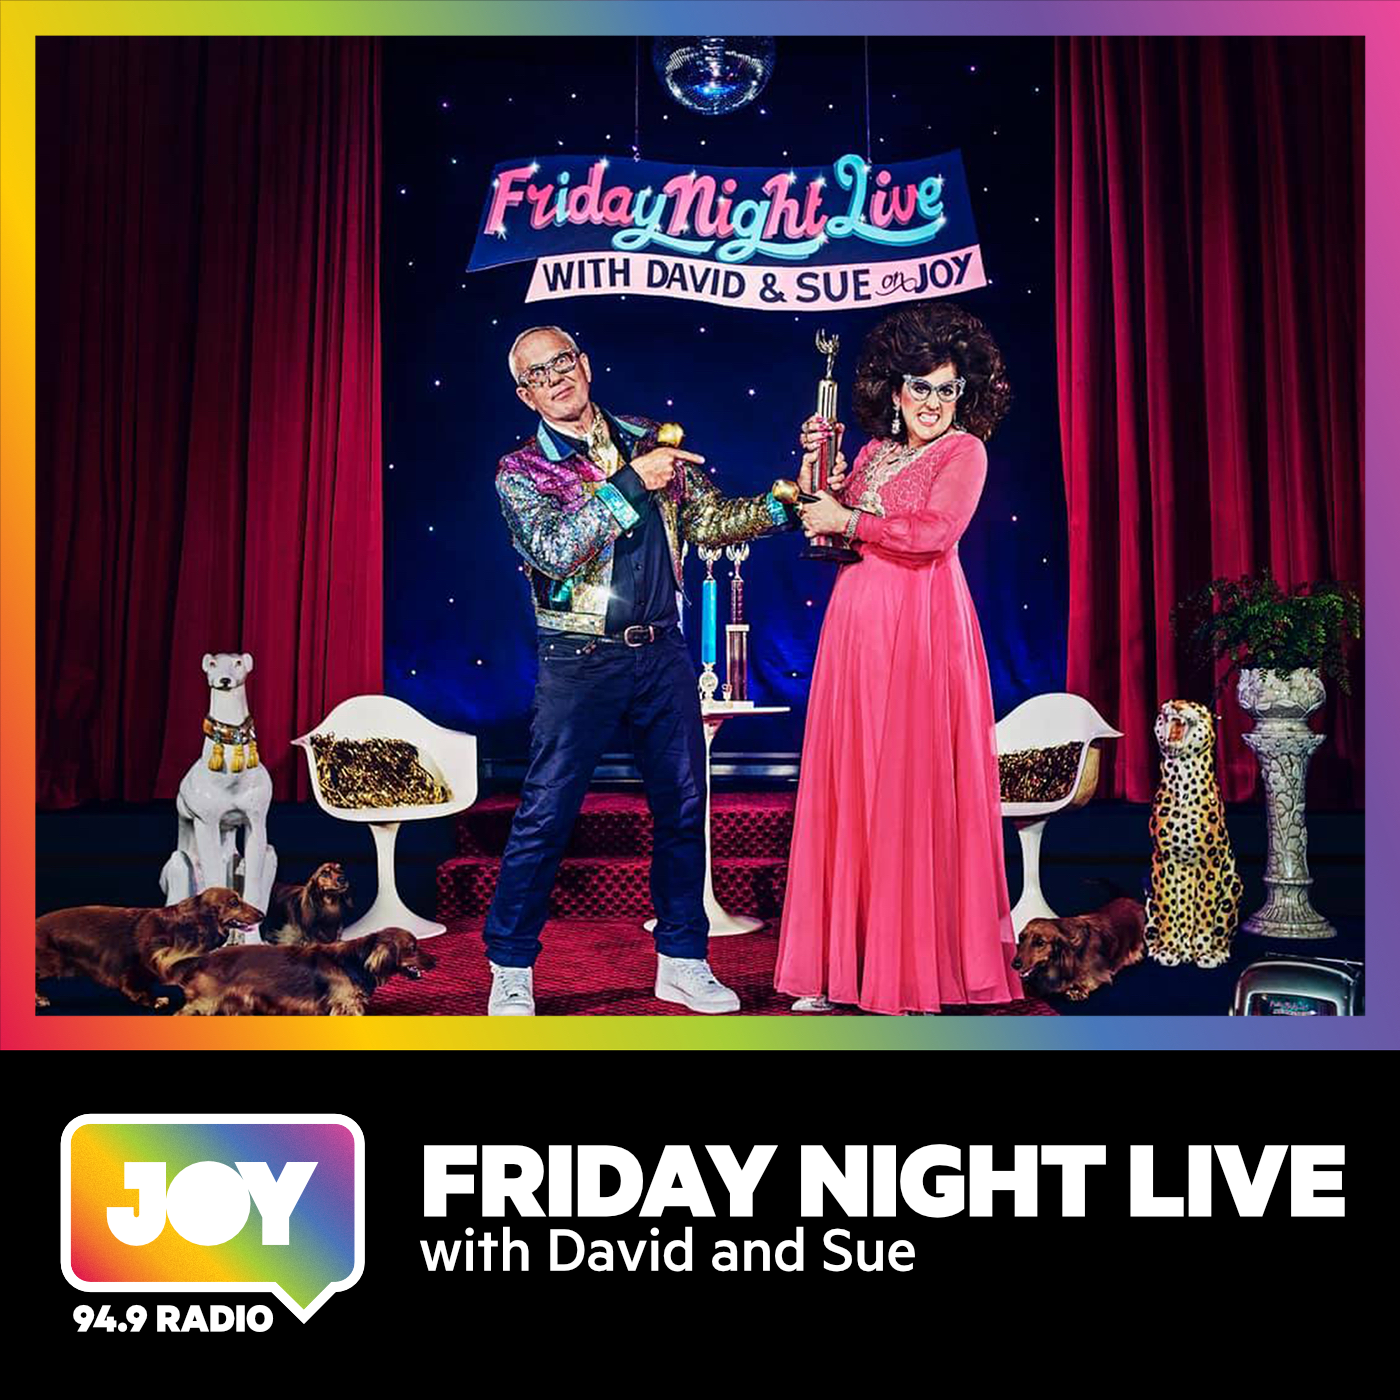 Friday Night Live with David and Sue